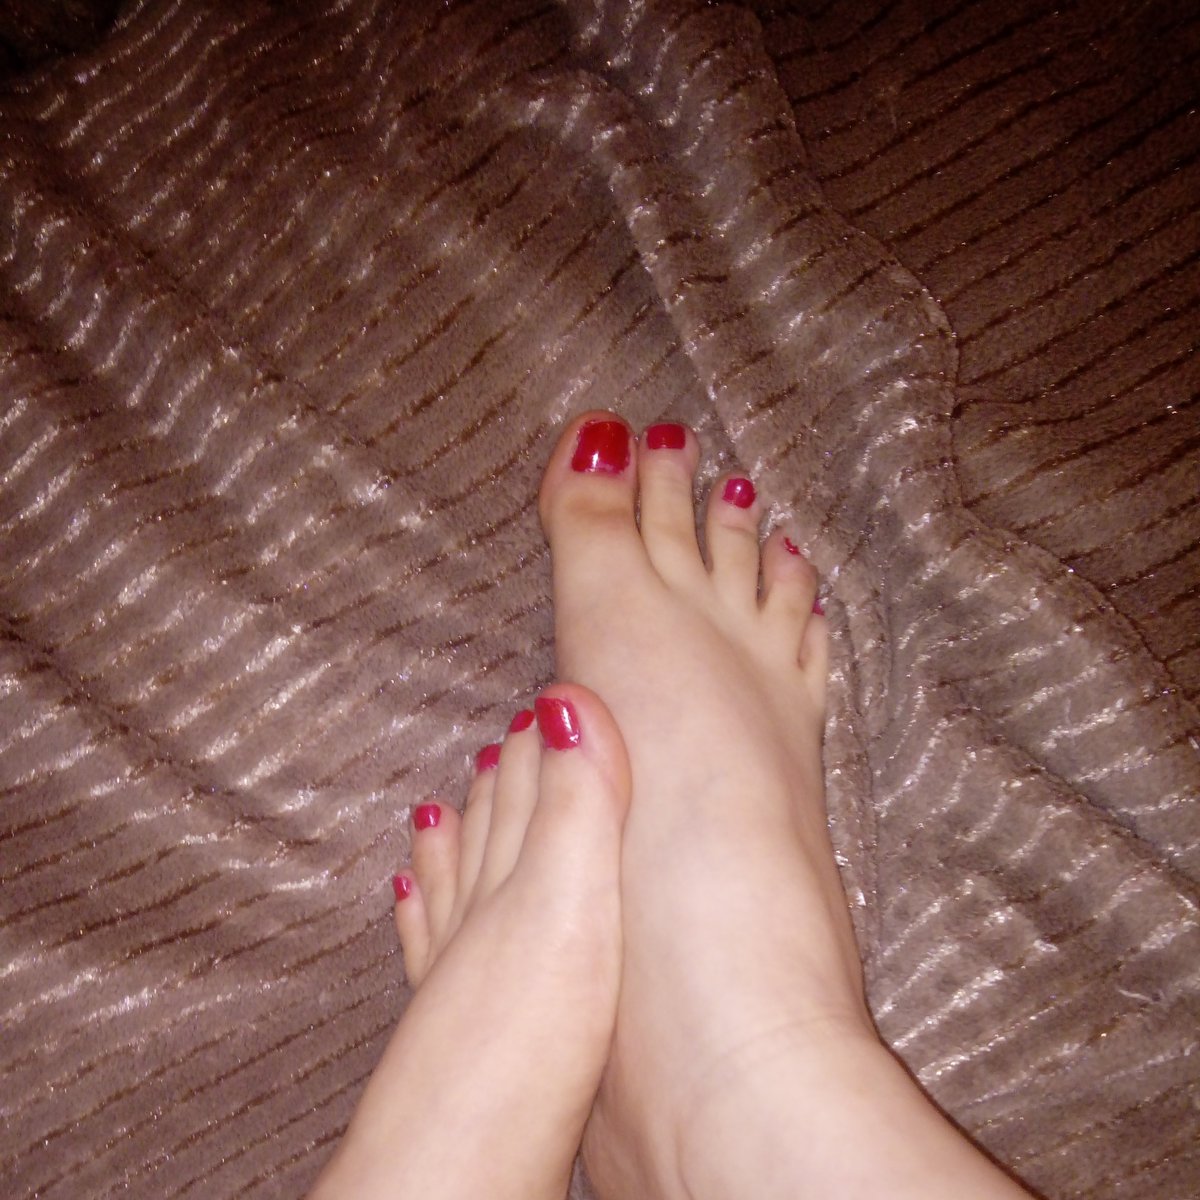 #redordead #footfetish #paypig #daintyfeet #uksize5 #smallfeet #footworship #paypigs #cherrytoes How pretty are these little toes?! Please retweet and help me gain some new followers!